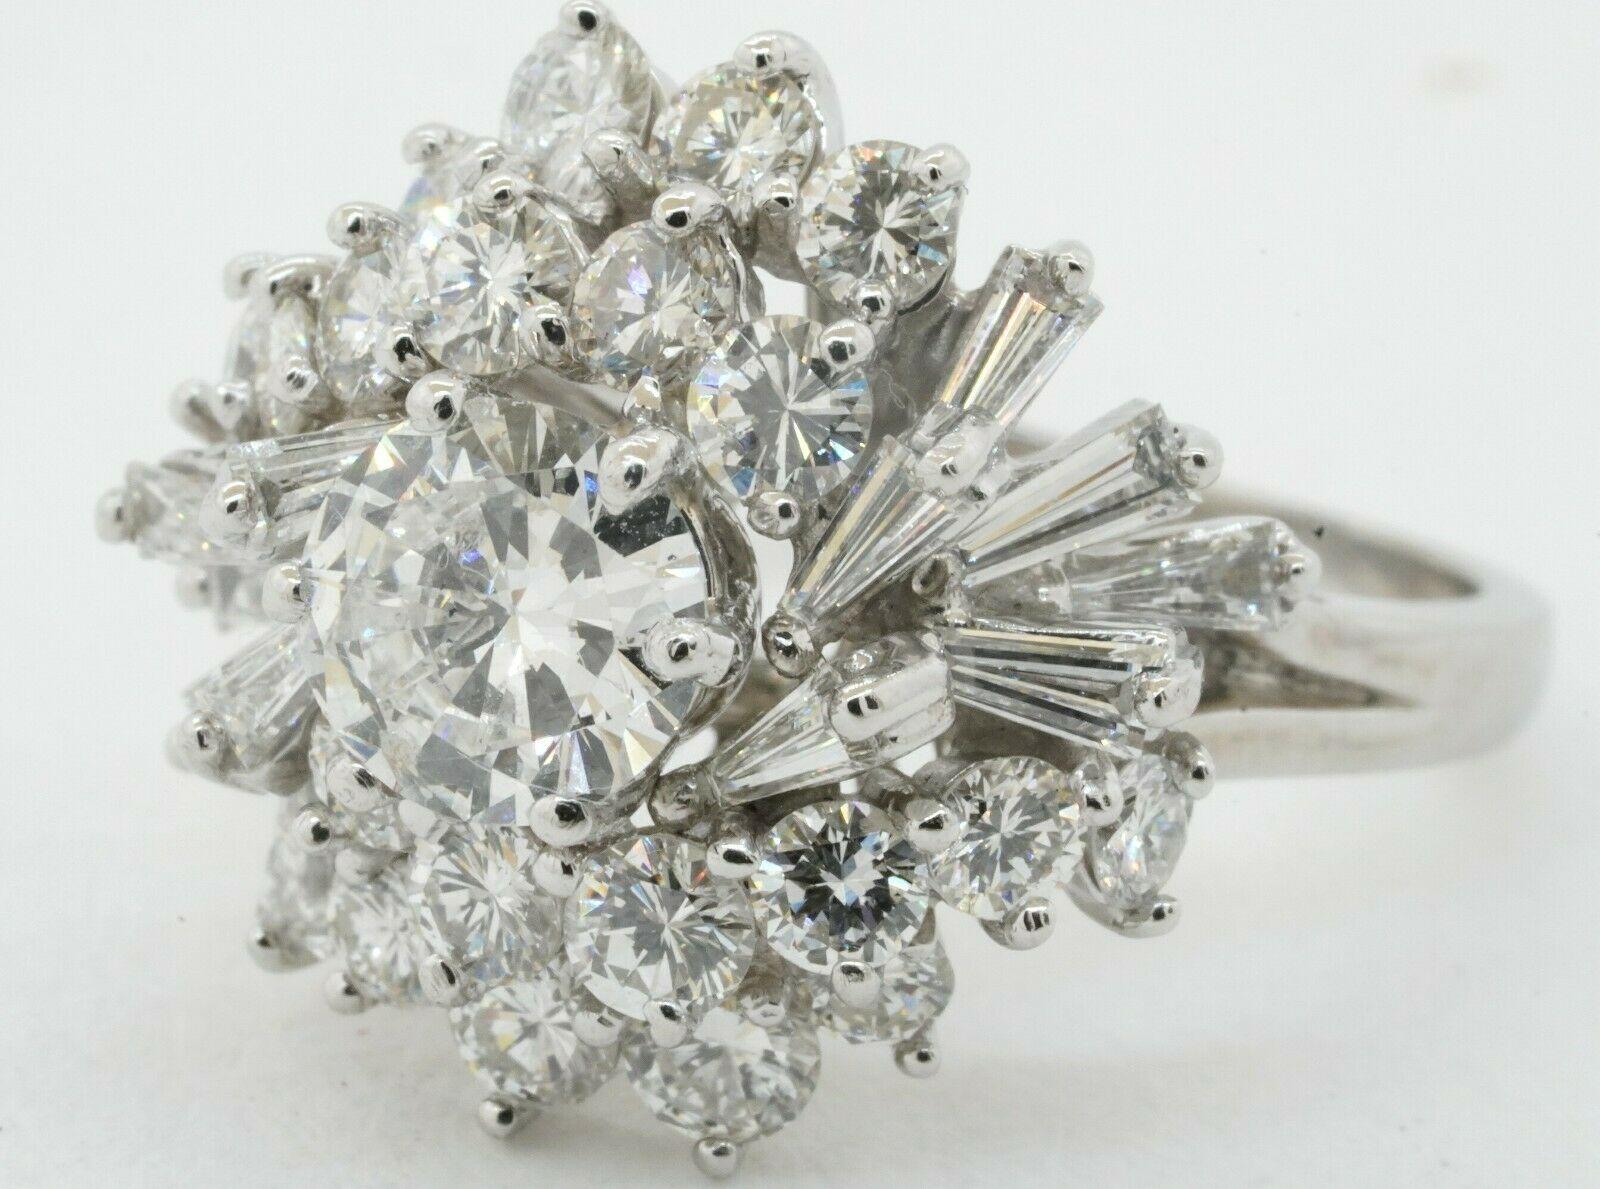 GIA heavy Platinum 3.93CTW VS diamond cluster cocktail ring w/ 1.01CT ctr. size 6.5. This extraordinary piece of jewelry is crafted in gorgeous Platinum & features 33 diamonds, with a combined weight of approx. 3.93CT. This includes a GIA certified